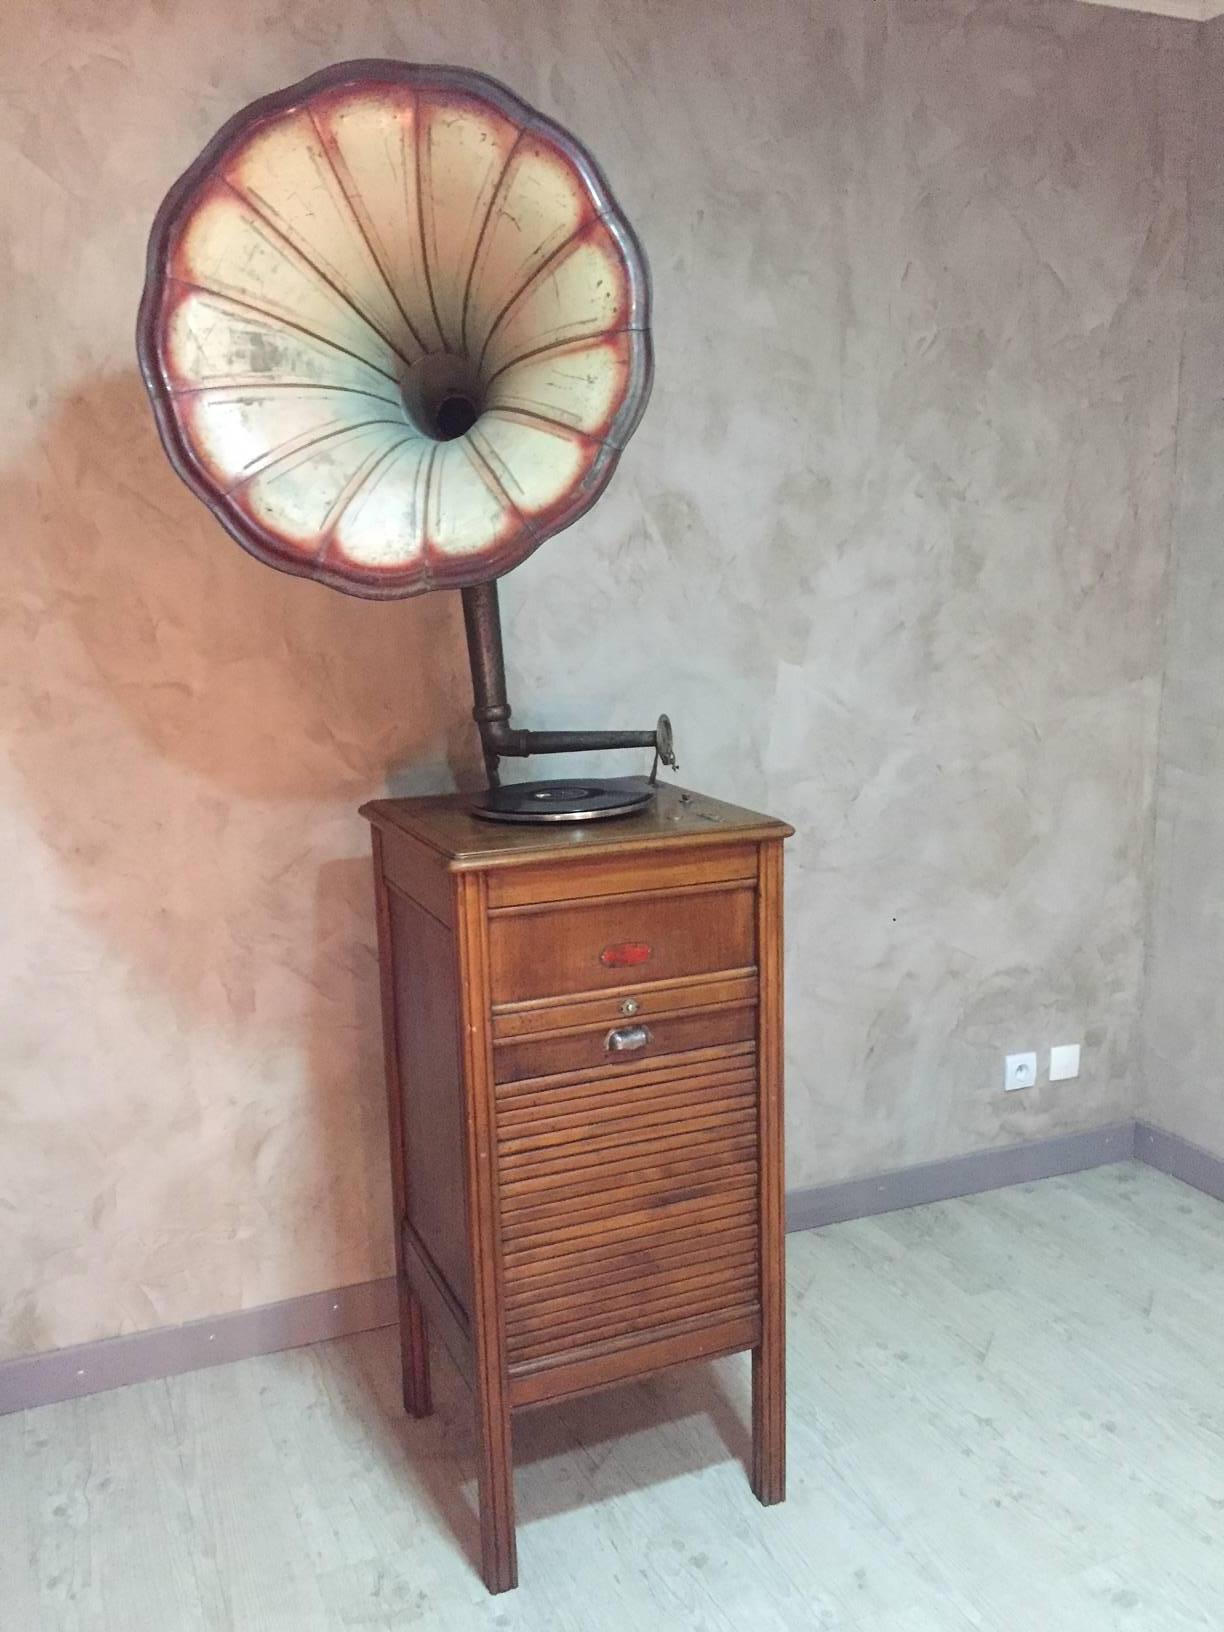 Rare French walnut working gramophone with a storage for disks. 
The needle hasn't been changed. The metal pavilion is in good condition and with original painting. It can be moved in the orientation you wish.
The storage part for disks is walnut